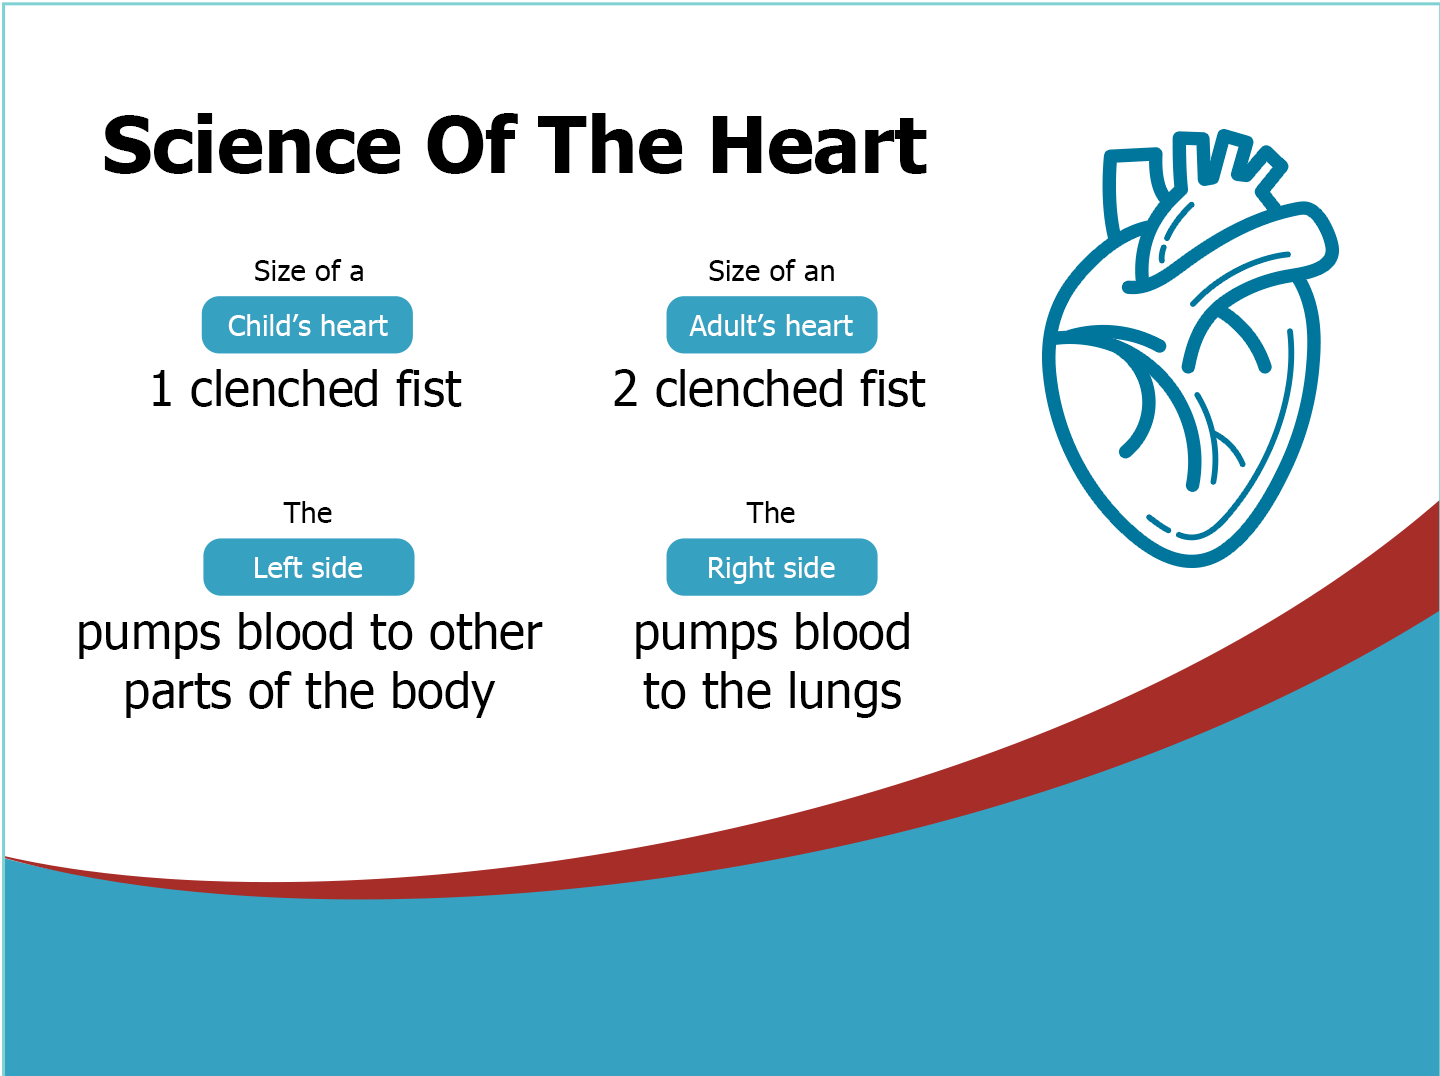 Heart science, size, and left/right functions illustrated